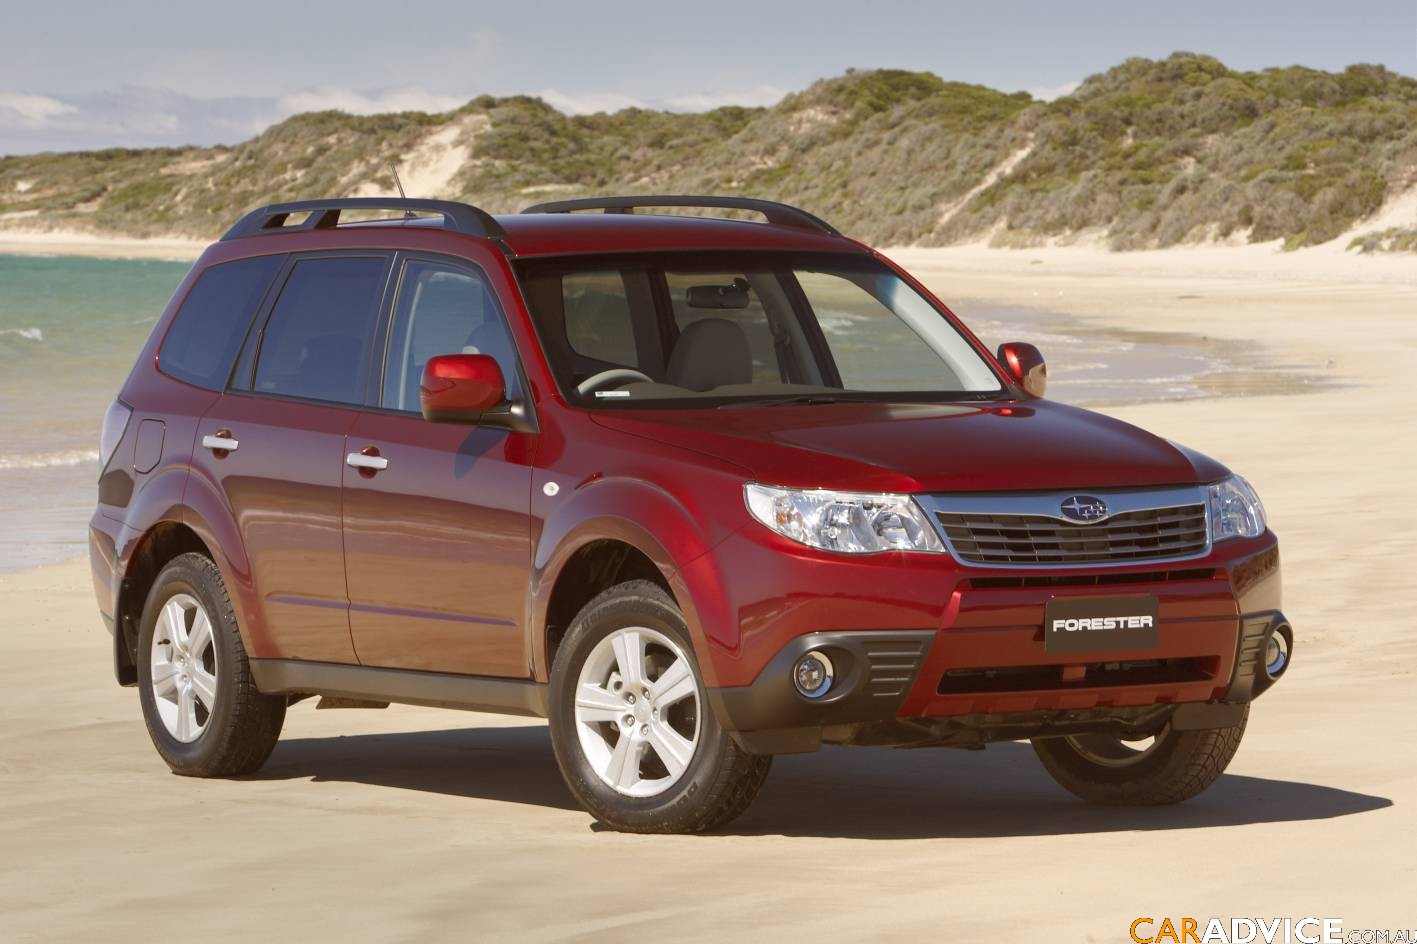 2009 Subaru Forester specifications Photos (1 of 12)